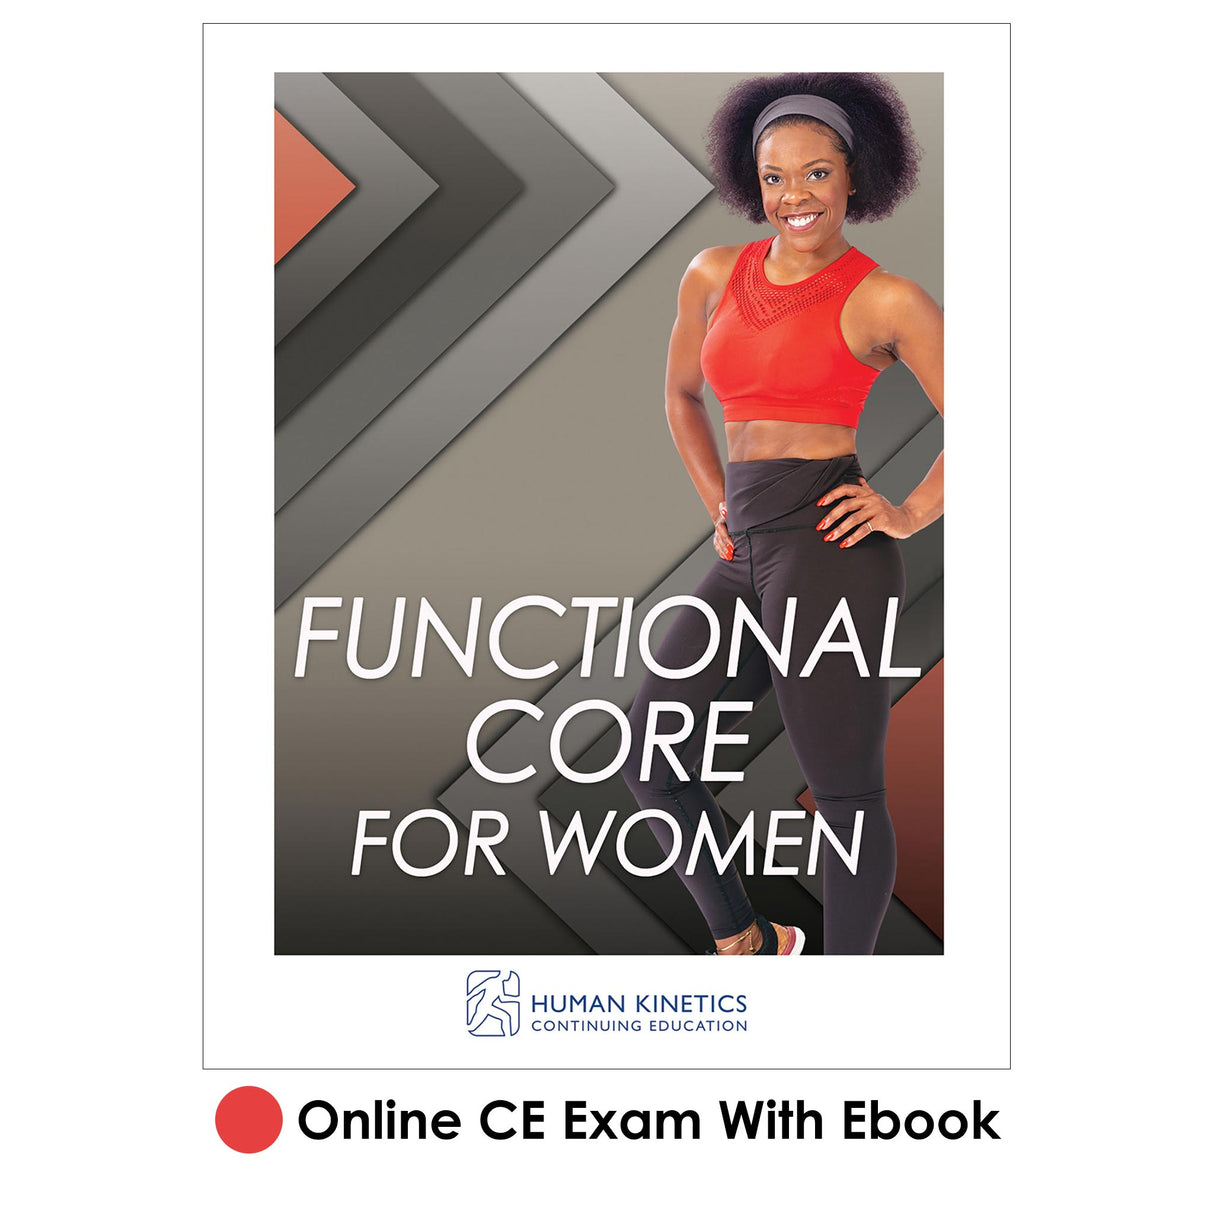 Functional Core for Women Online CE Exam With Ebook